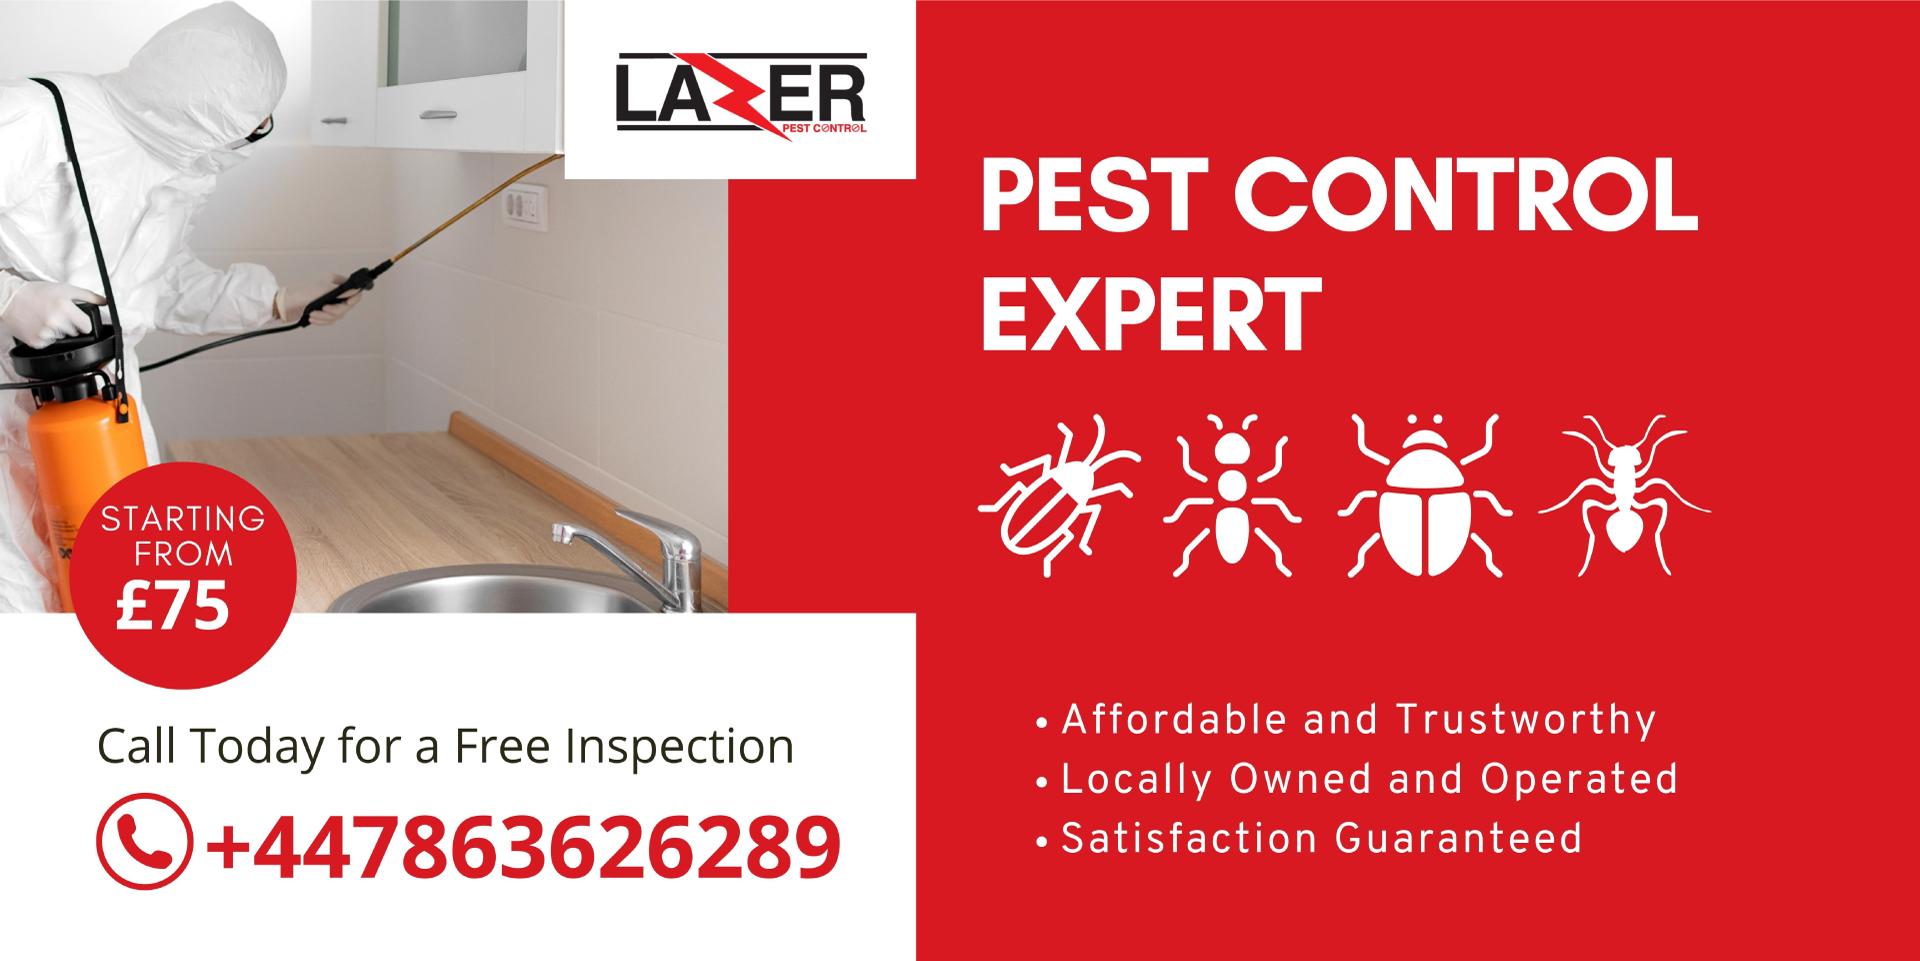 Blog And Offers - Lazer Pest Control London